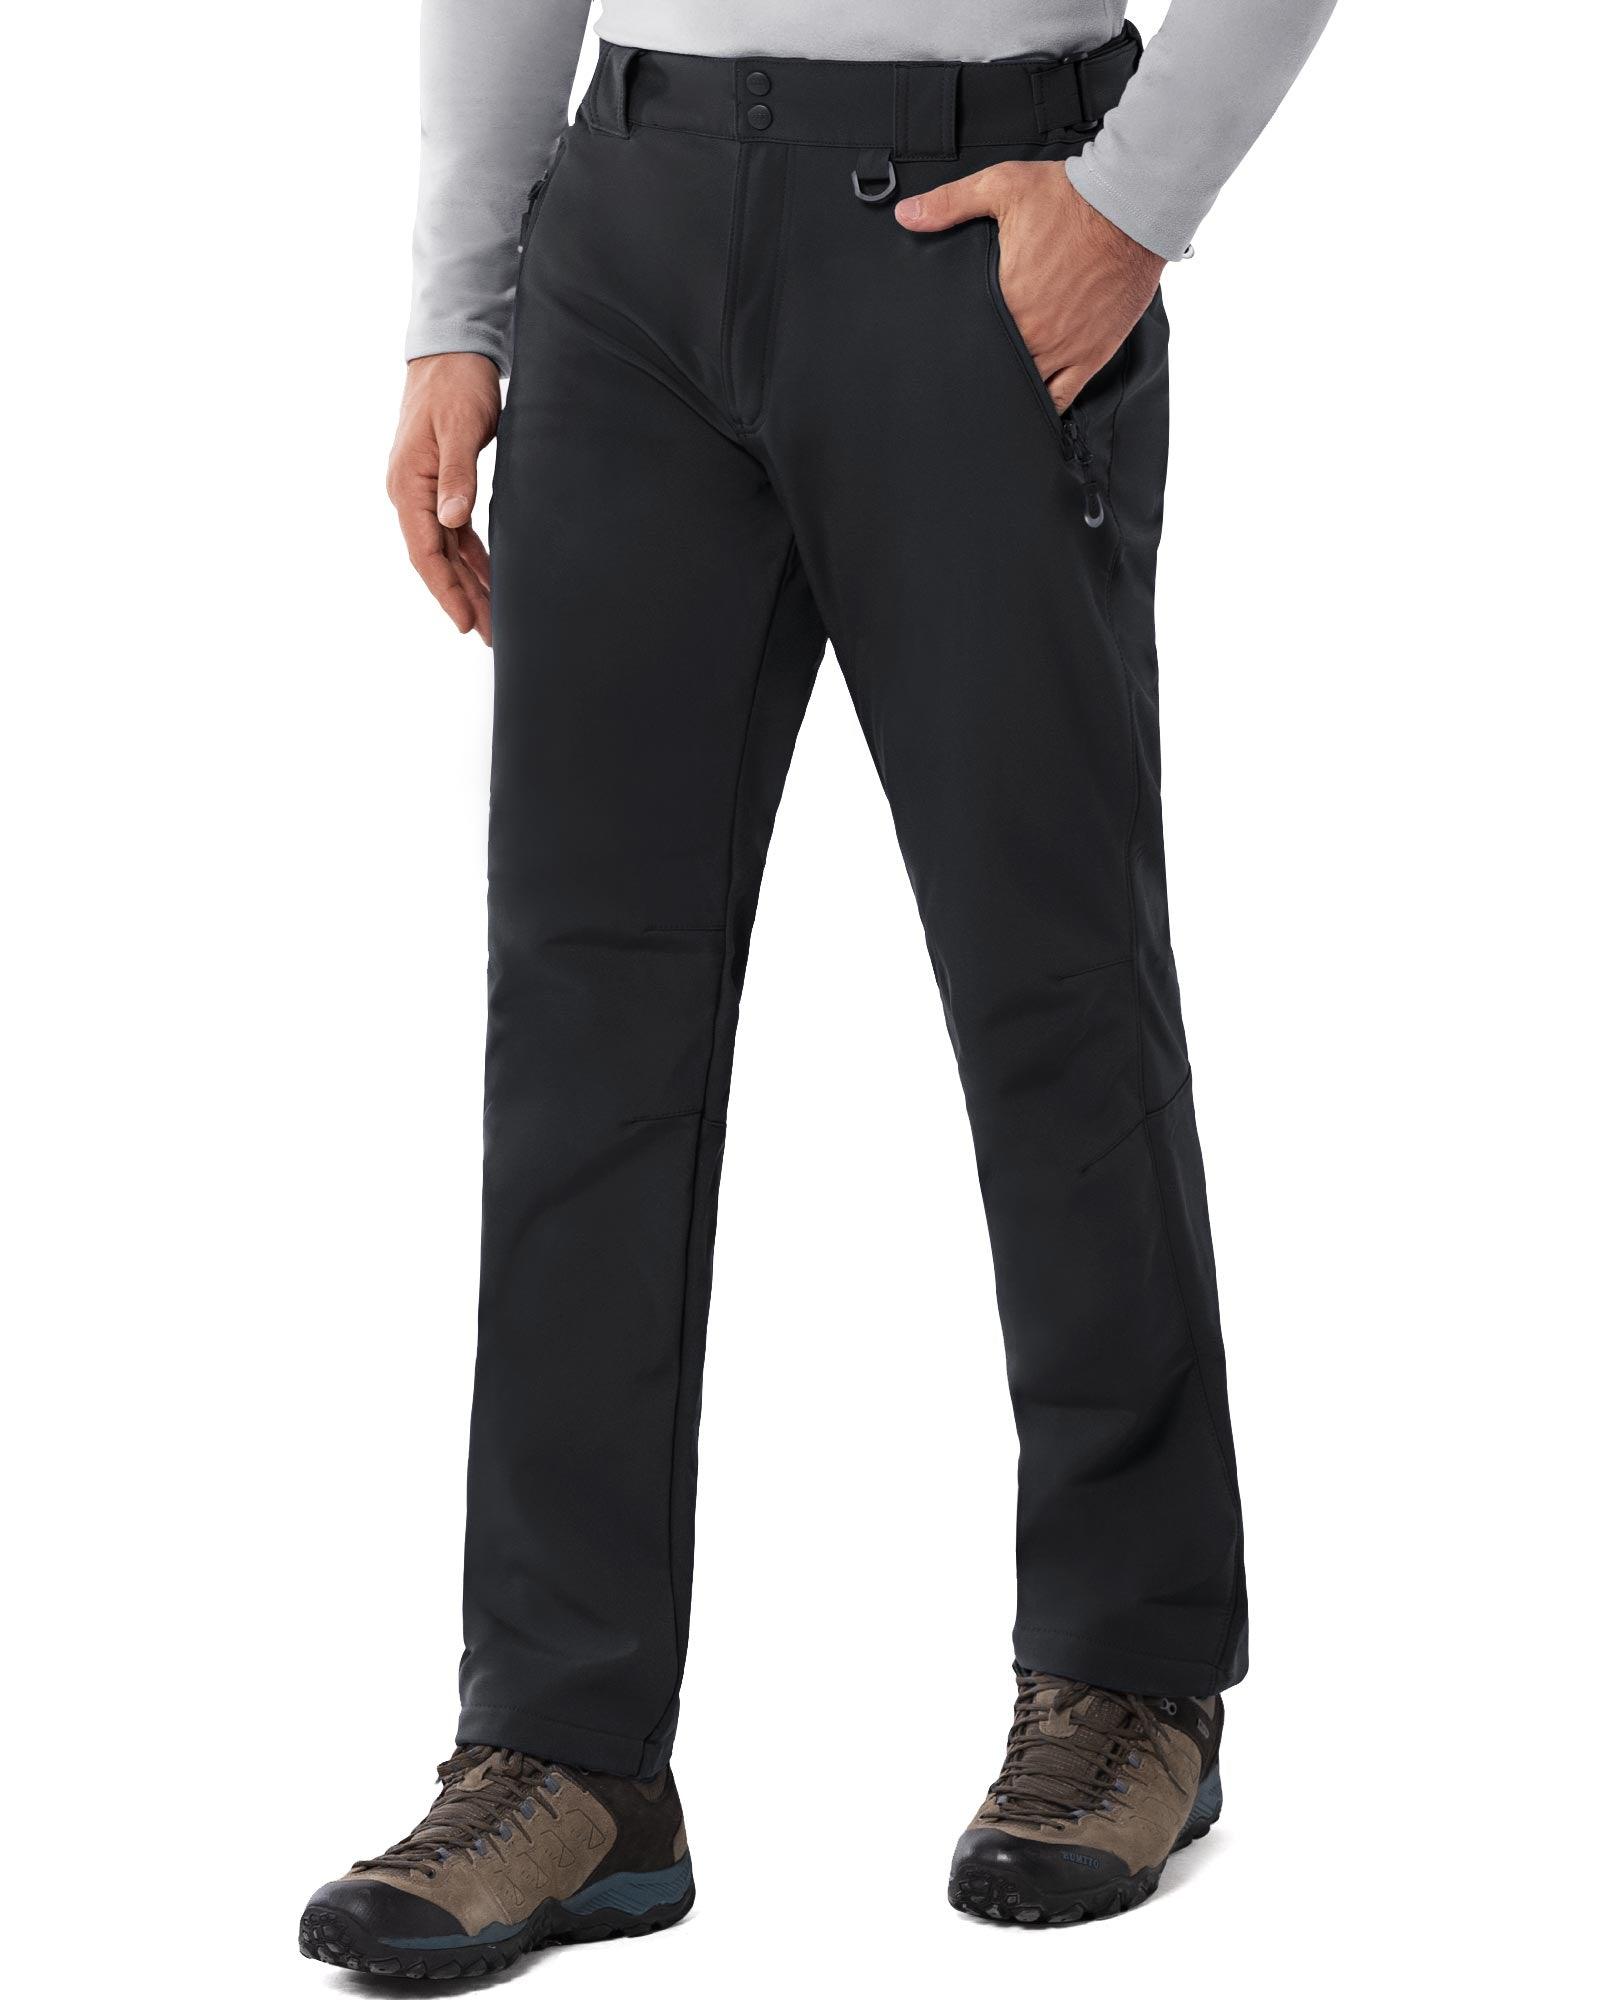 8000mm W/P Index Men's Snow Fleece Lined Pants with 4 Pockets and